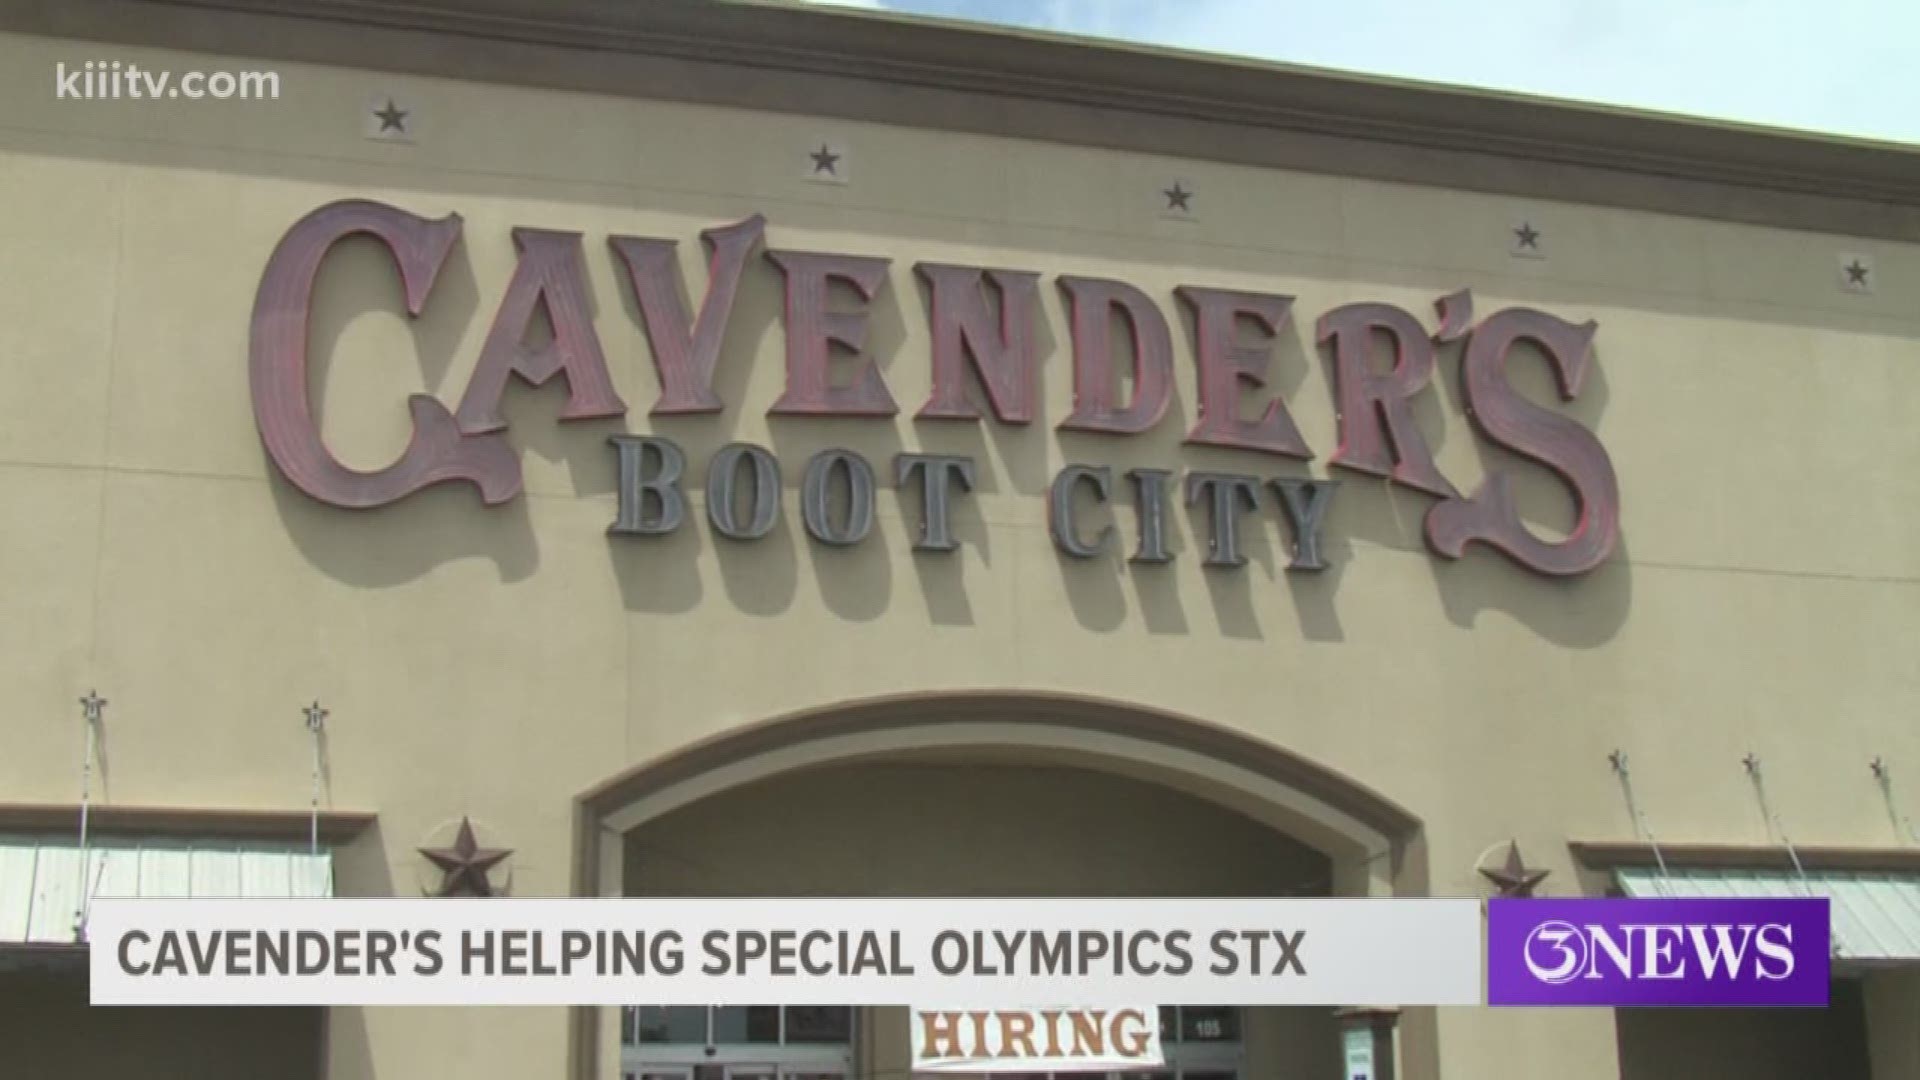 The individuals with Special Olympics South Texas received financial help from Cavender's Boot City Tuesday.